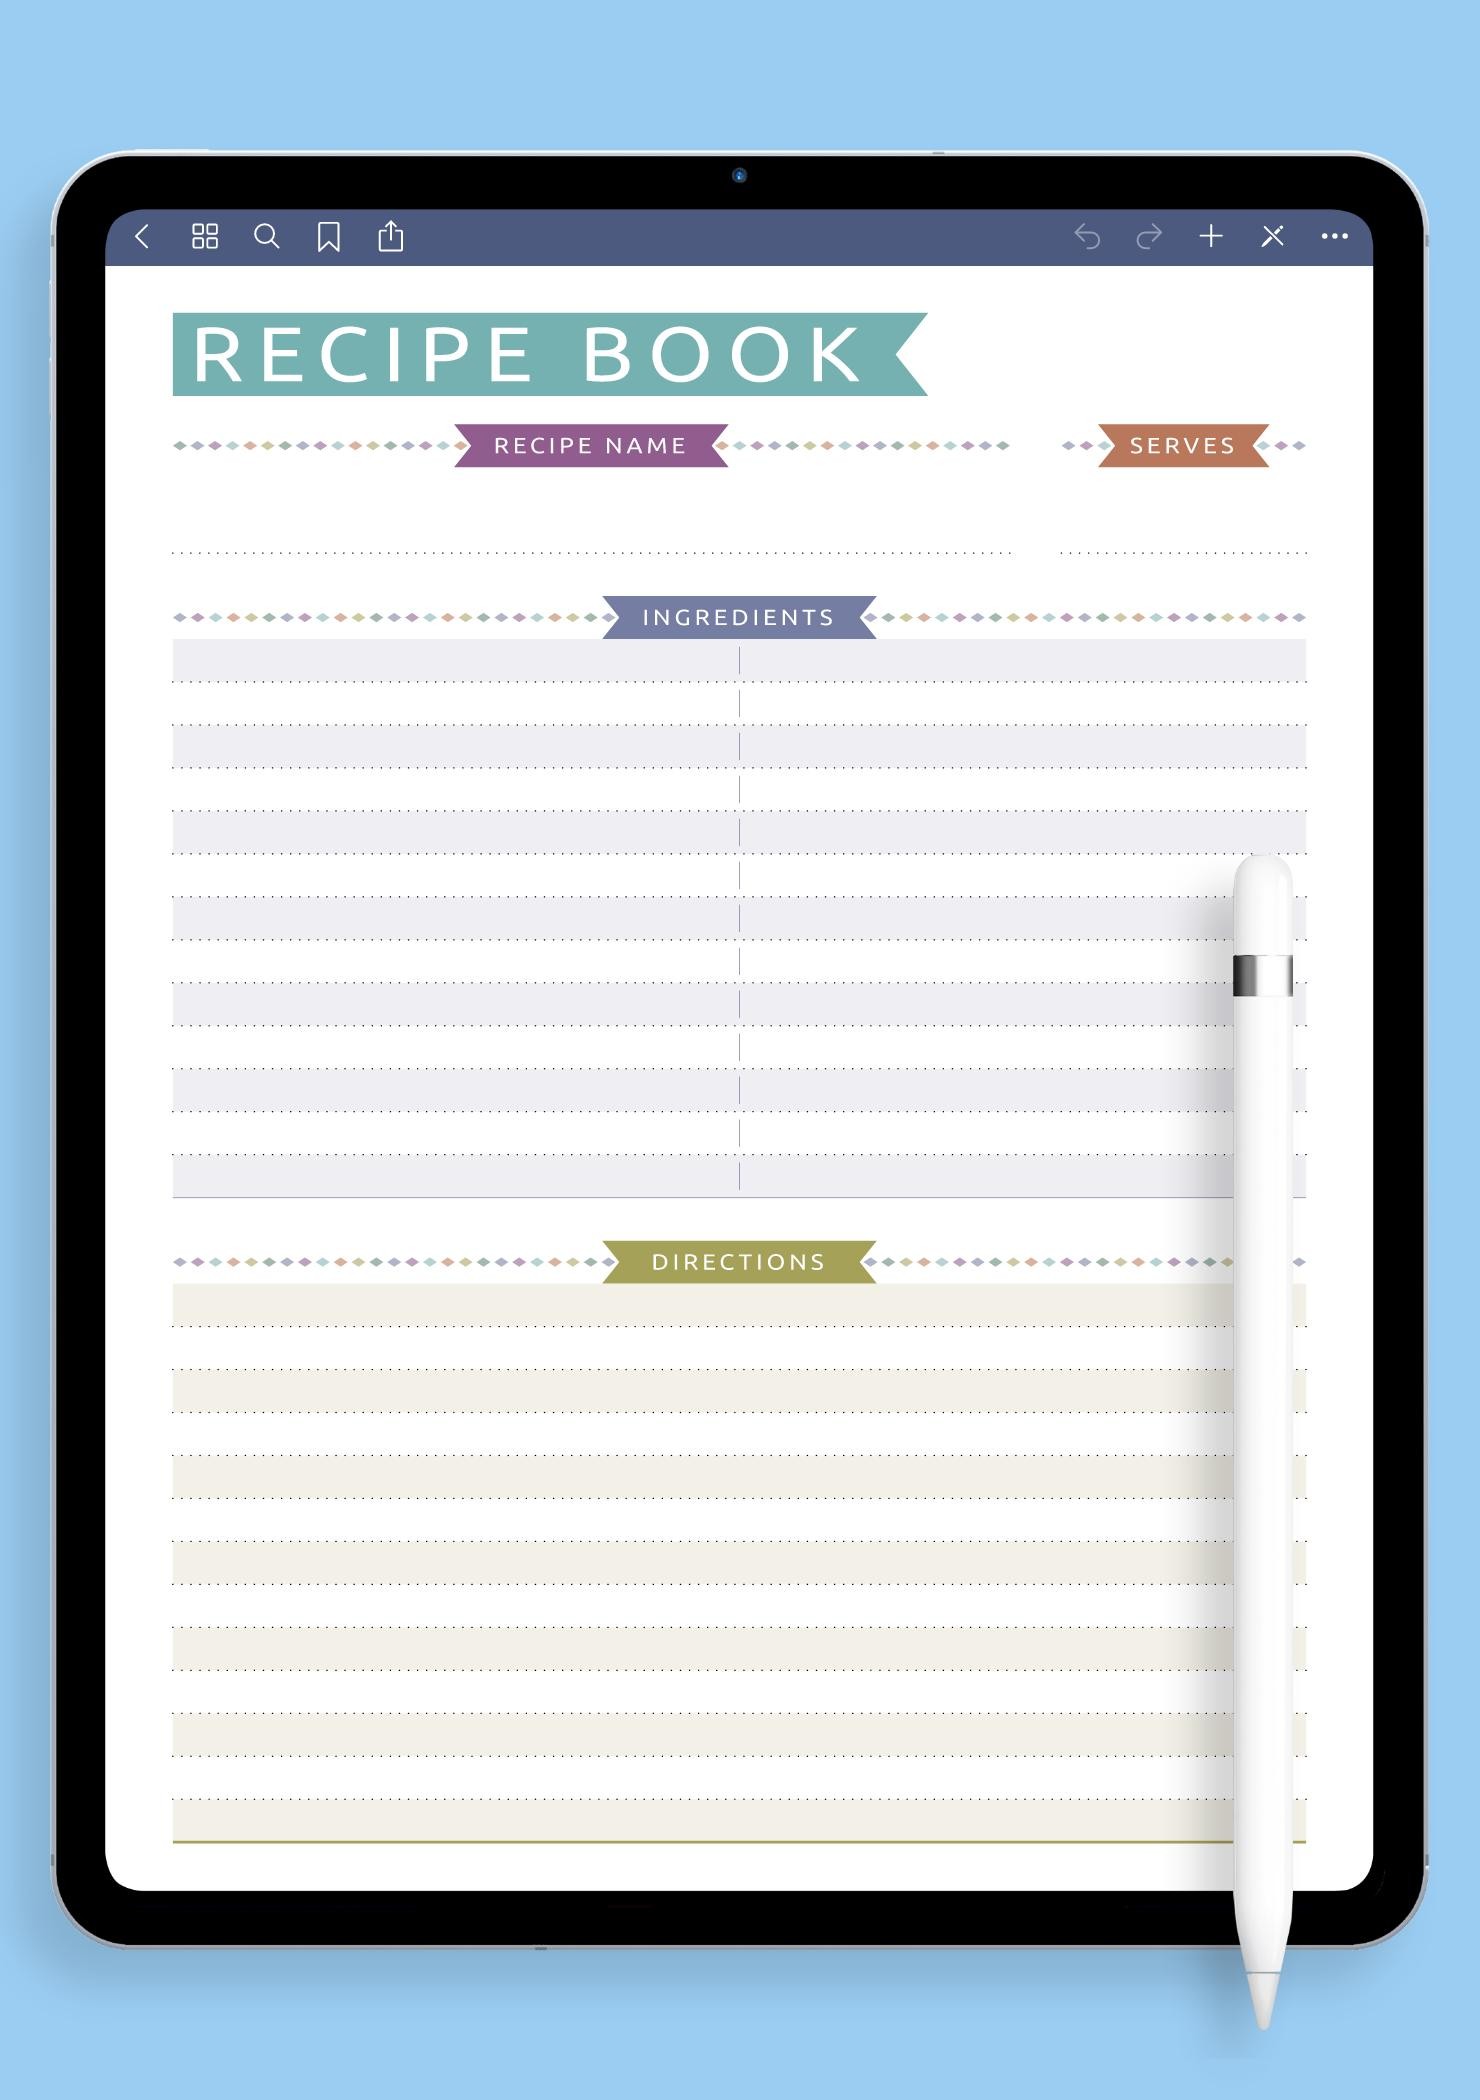 https://onplanners.com/sites/default/files/styles/template_fancy/public/teaser-photos/recipe-book-template-casual-style-ipad.jpeg